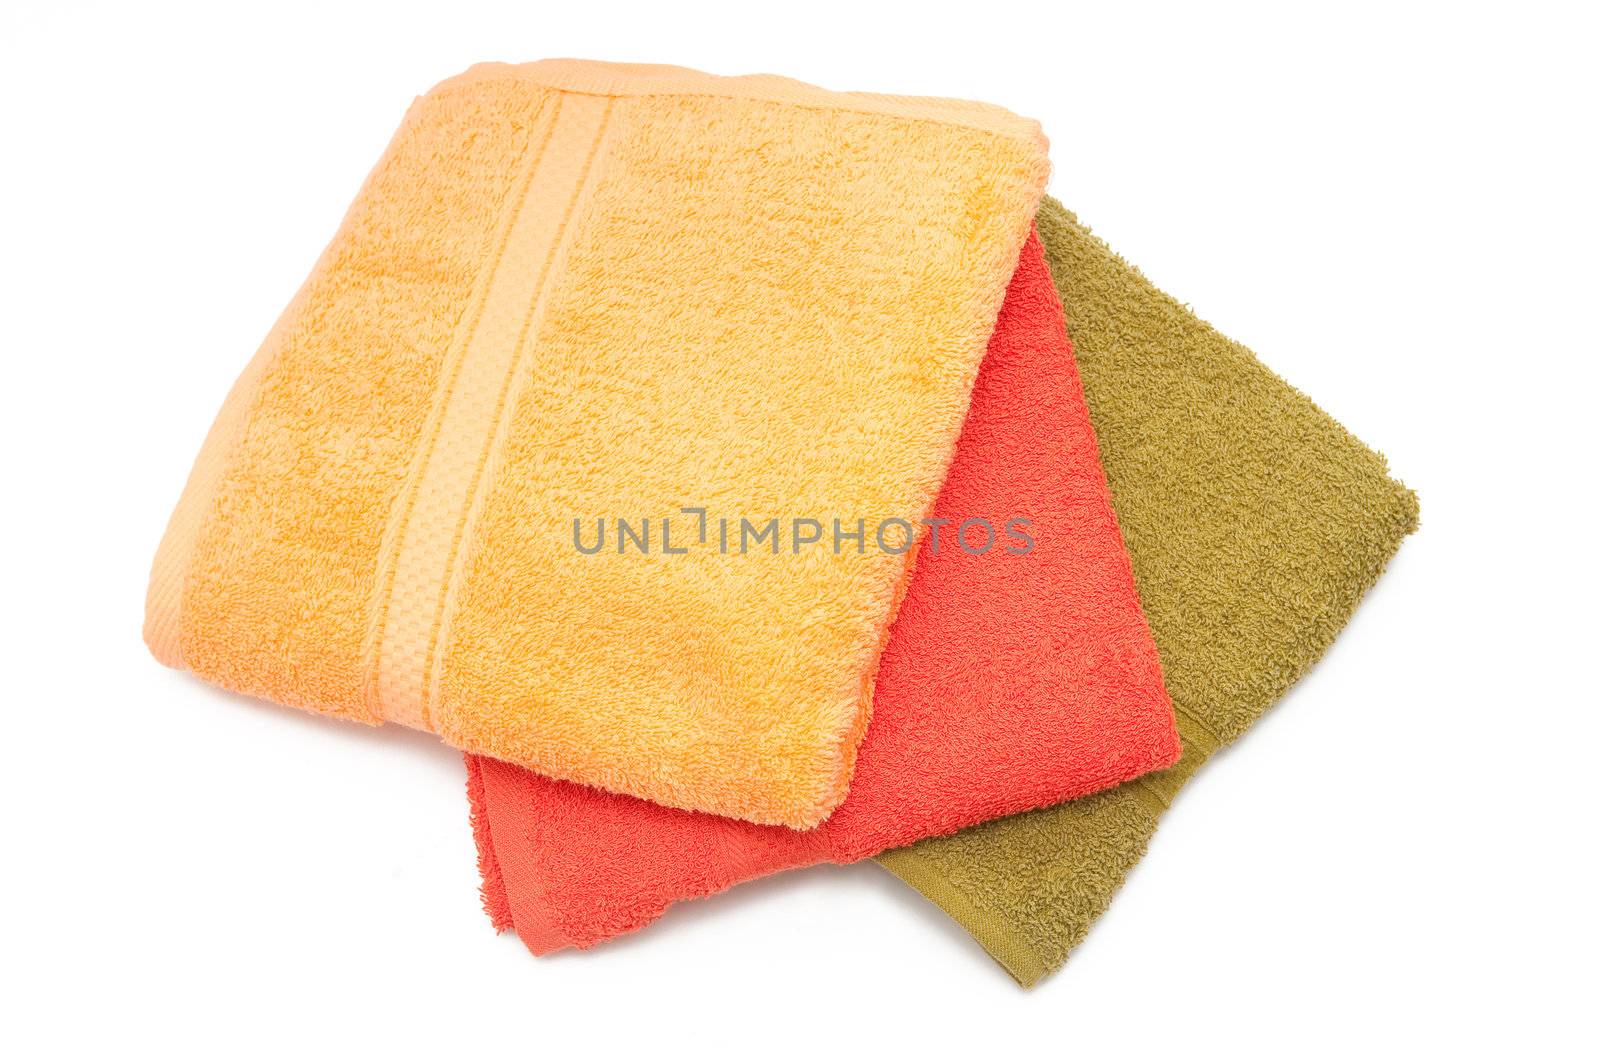 Three towels on the white background